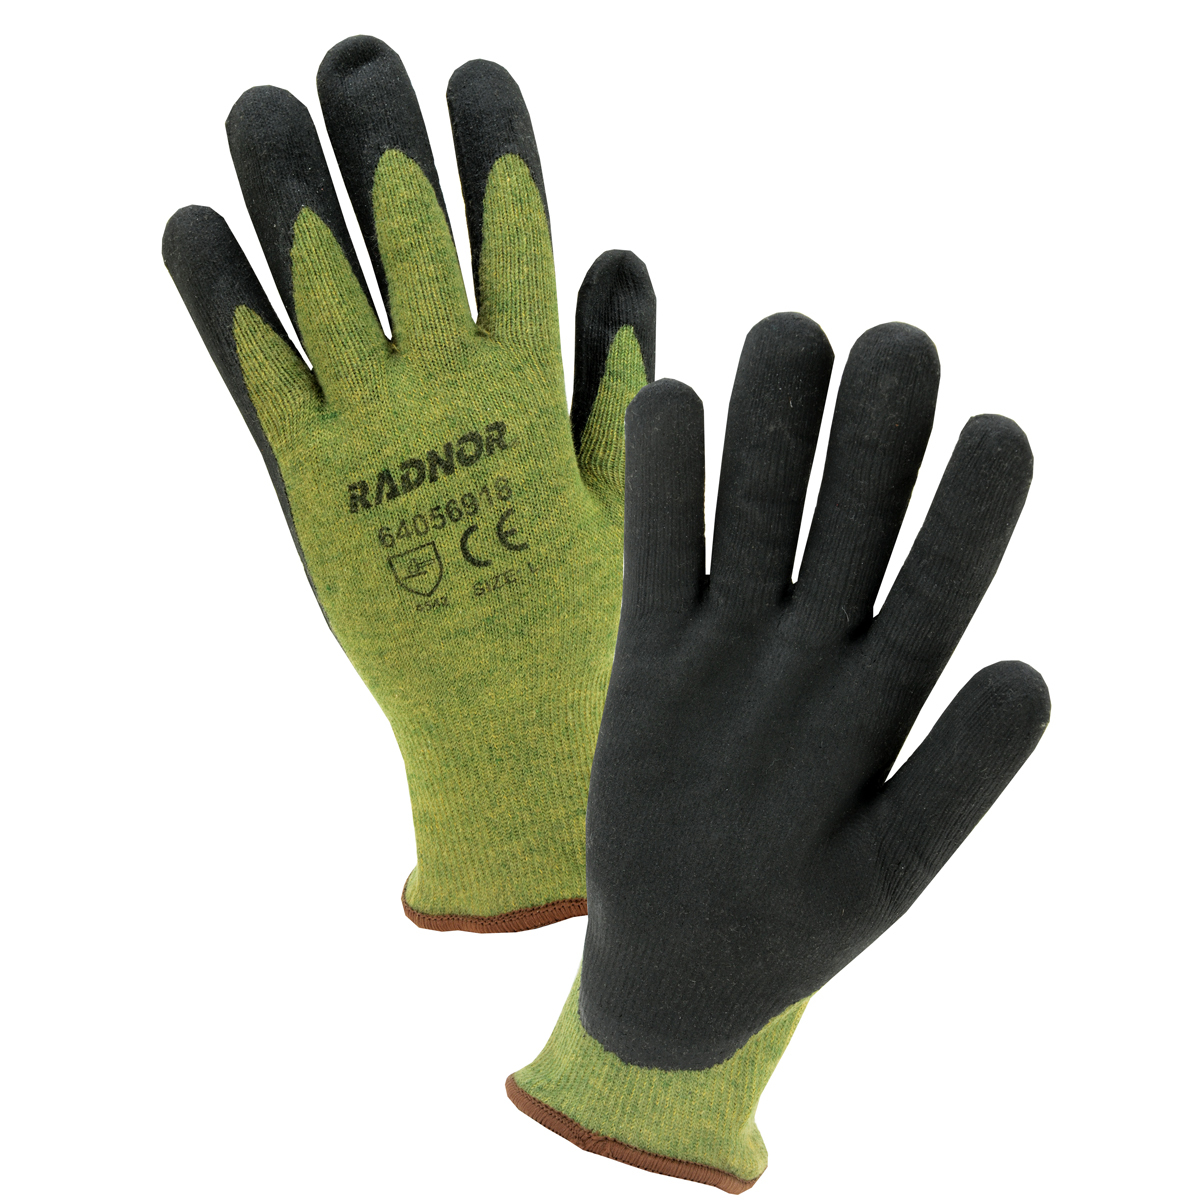 RADNOR® X-Large 13 Gauge DuPont™ Kevlar®, Nitrile And Stainless Steel Cut Resistant Gloves With Foam Nitrile Coating